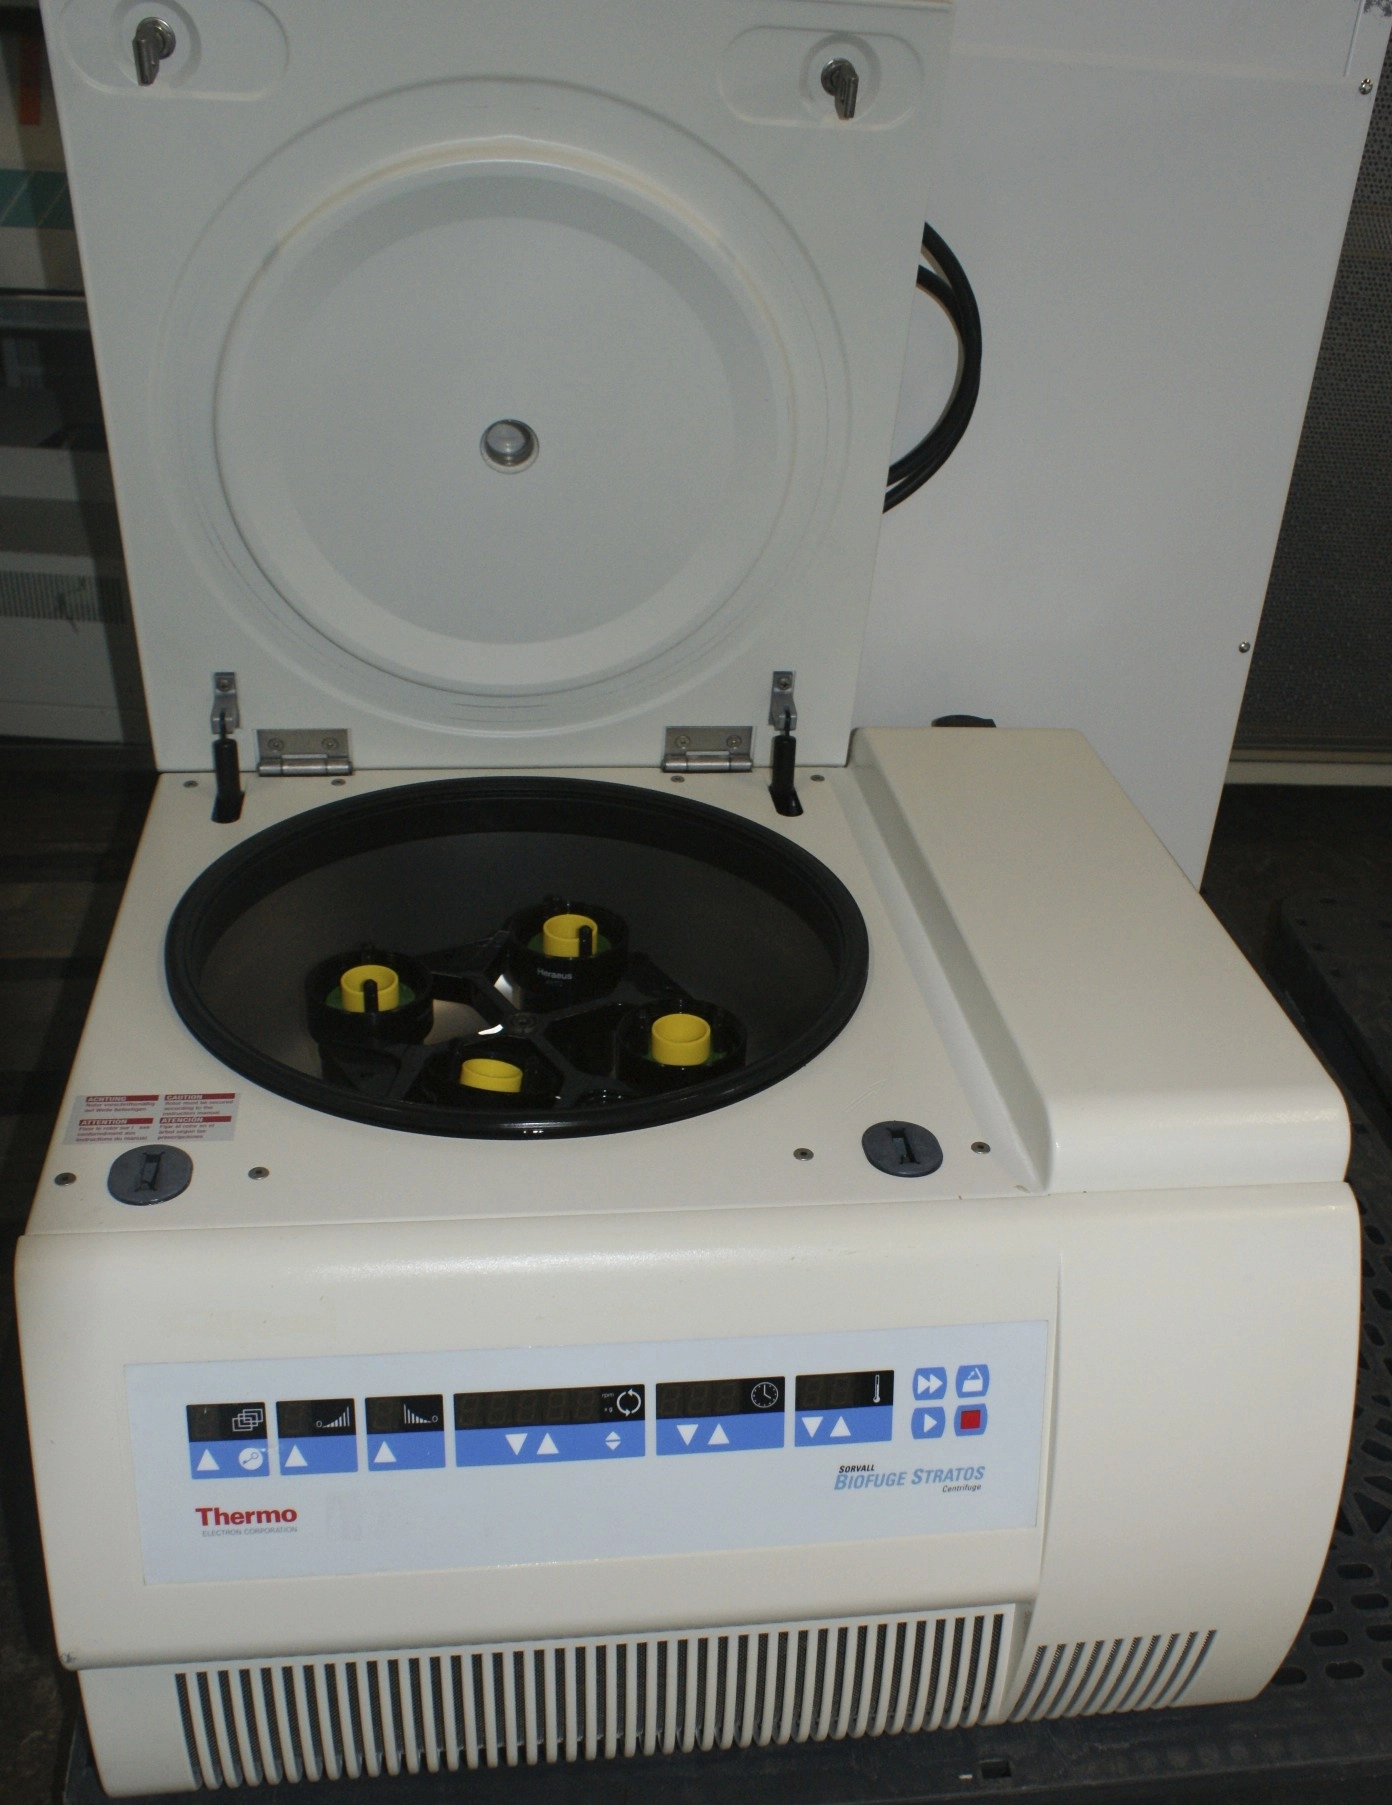 Thermo Electron/Sorvall Biofuge Stratos Benchtop Centrifuge with swing bucket rotor excellent condition used Heraeus Biofuge